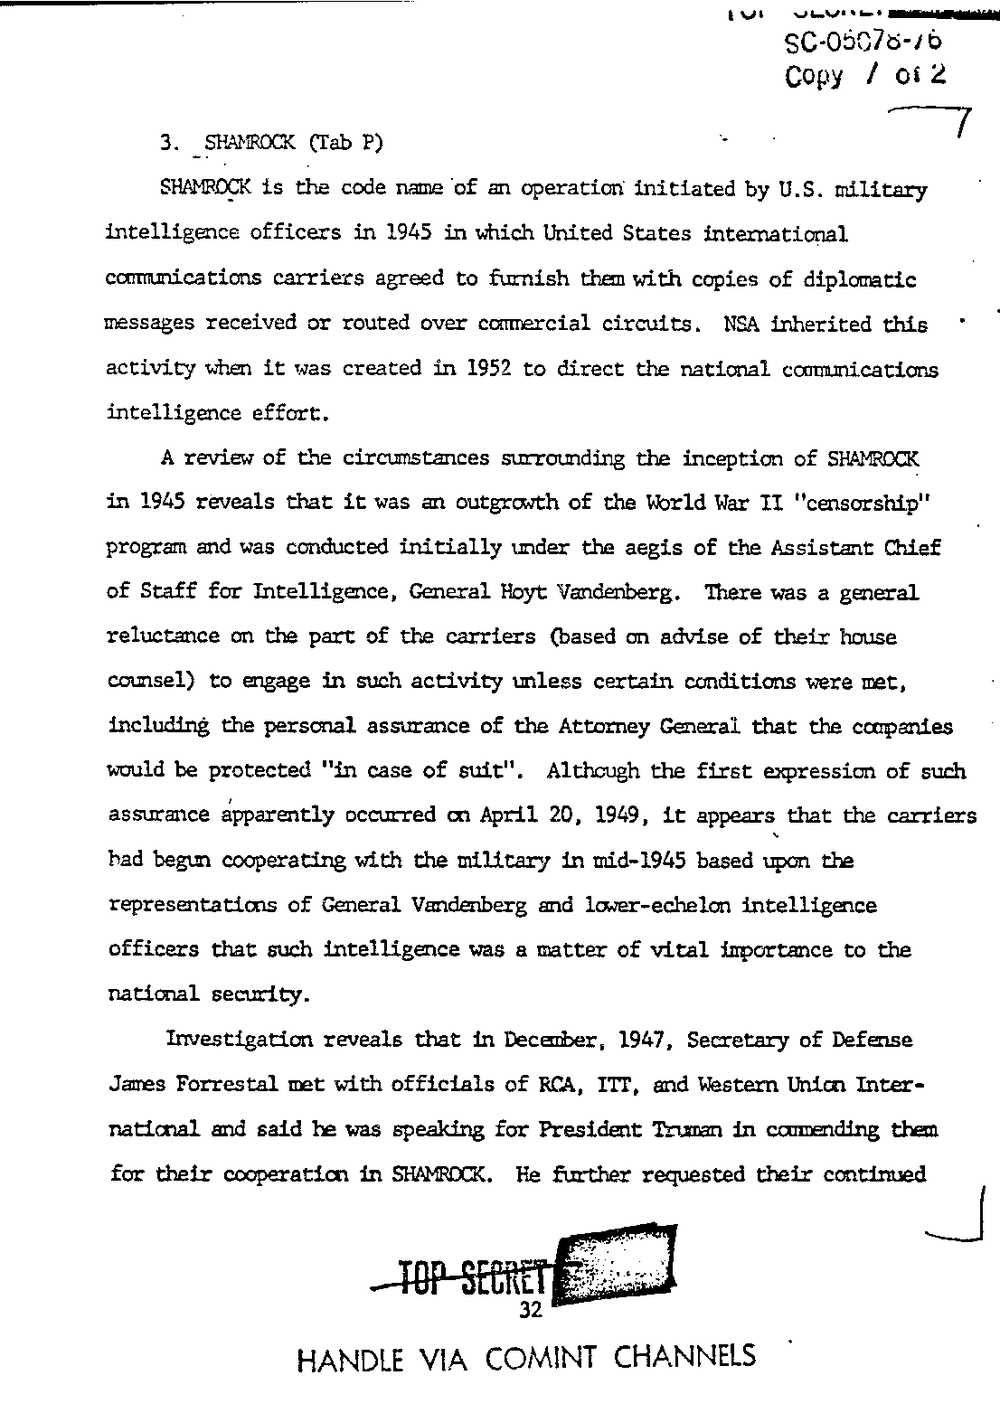 Page 40 from Report on Inquiry Into CIA Related Electronic Surveillance Activities